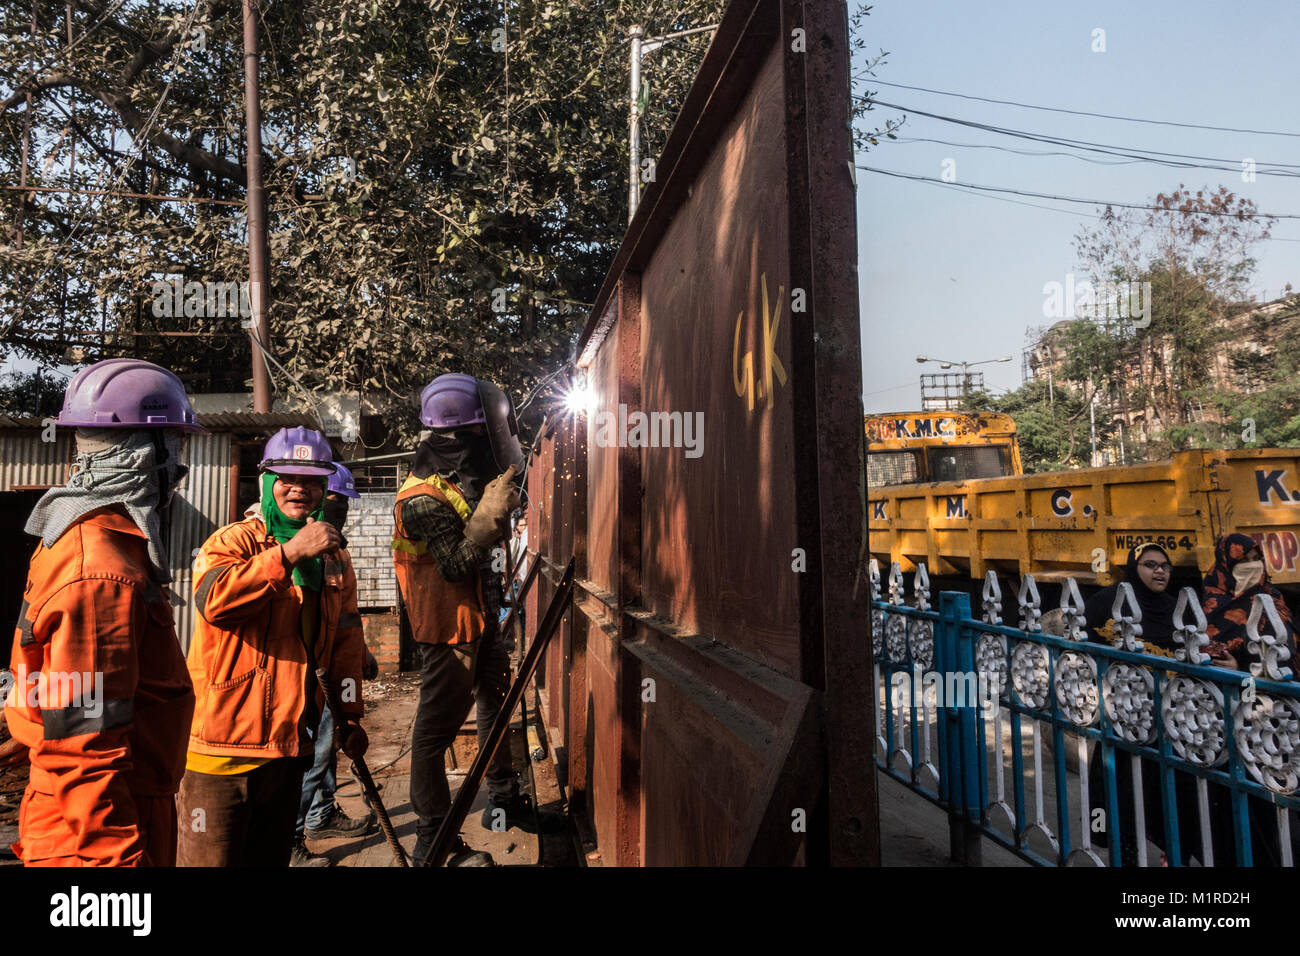 Kolkata, India. 31st Jan, 2018. Laborers work at metro railway construction site in Kolkata, India, on Jan. 31, 2018. The Indian government on Thursday unveiled its budget for the financial year 2018-19, with a focus on agriculture, infrastructure and healthcare. Credit: Tumpa Mondal/Xinhua/Alamy Live News Stock Photo